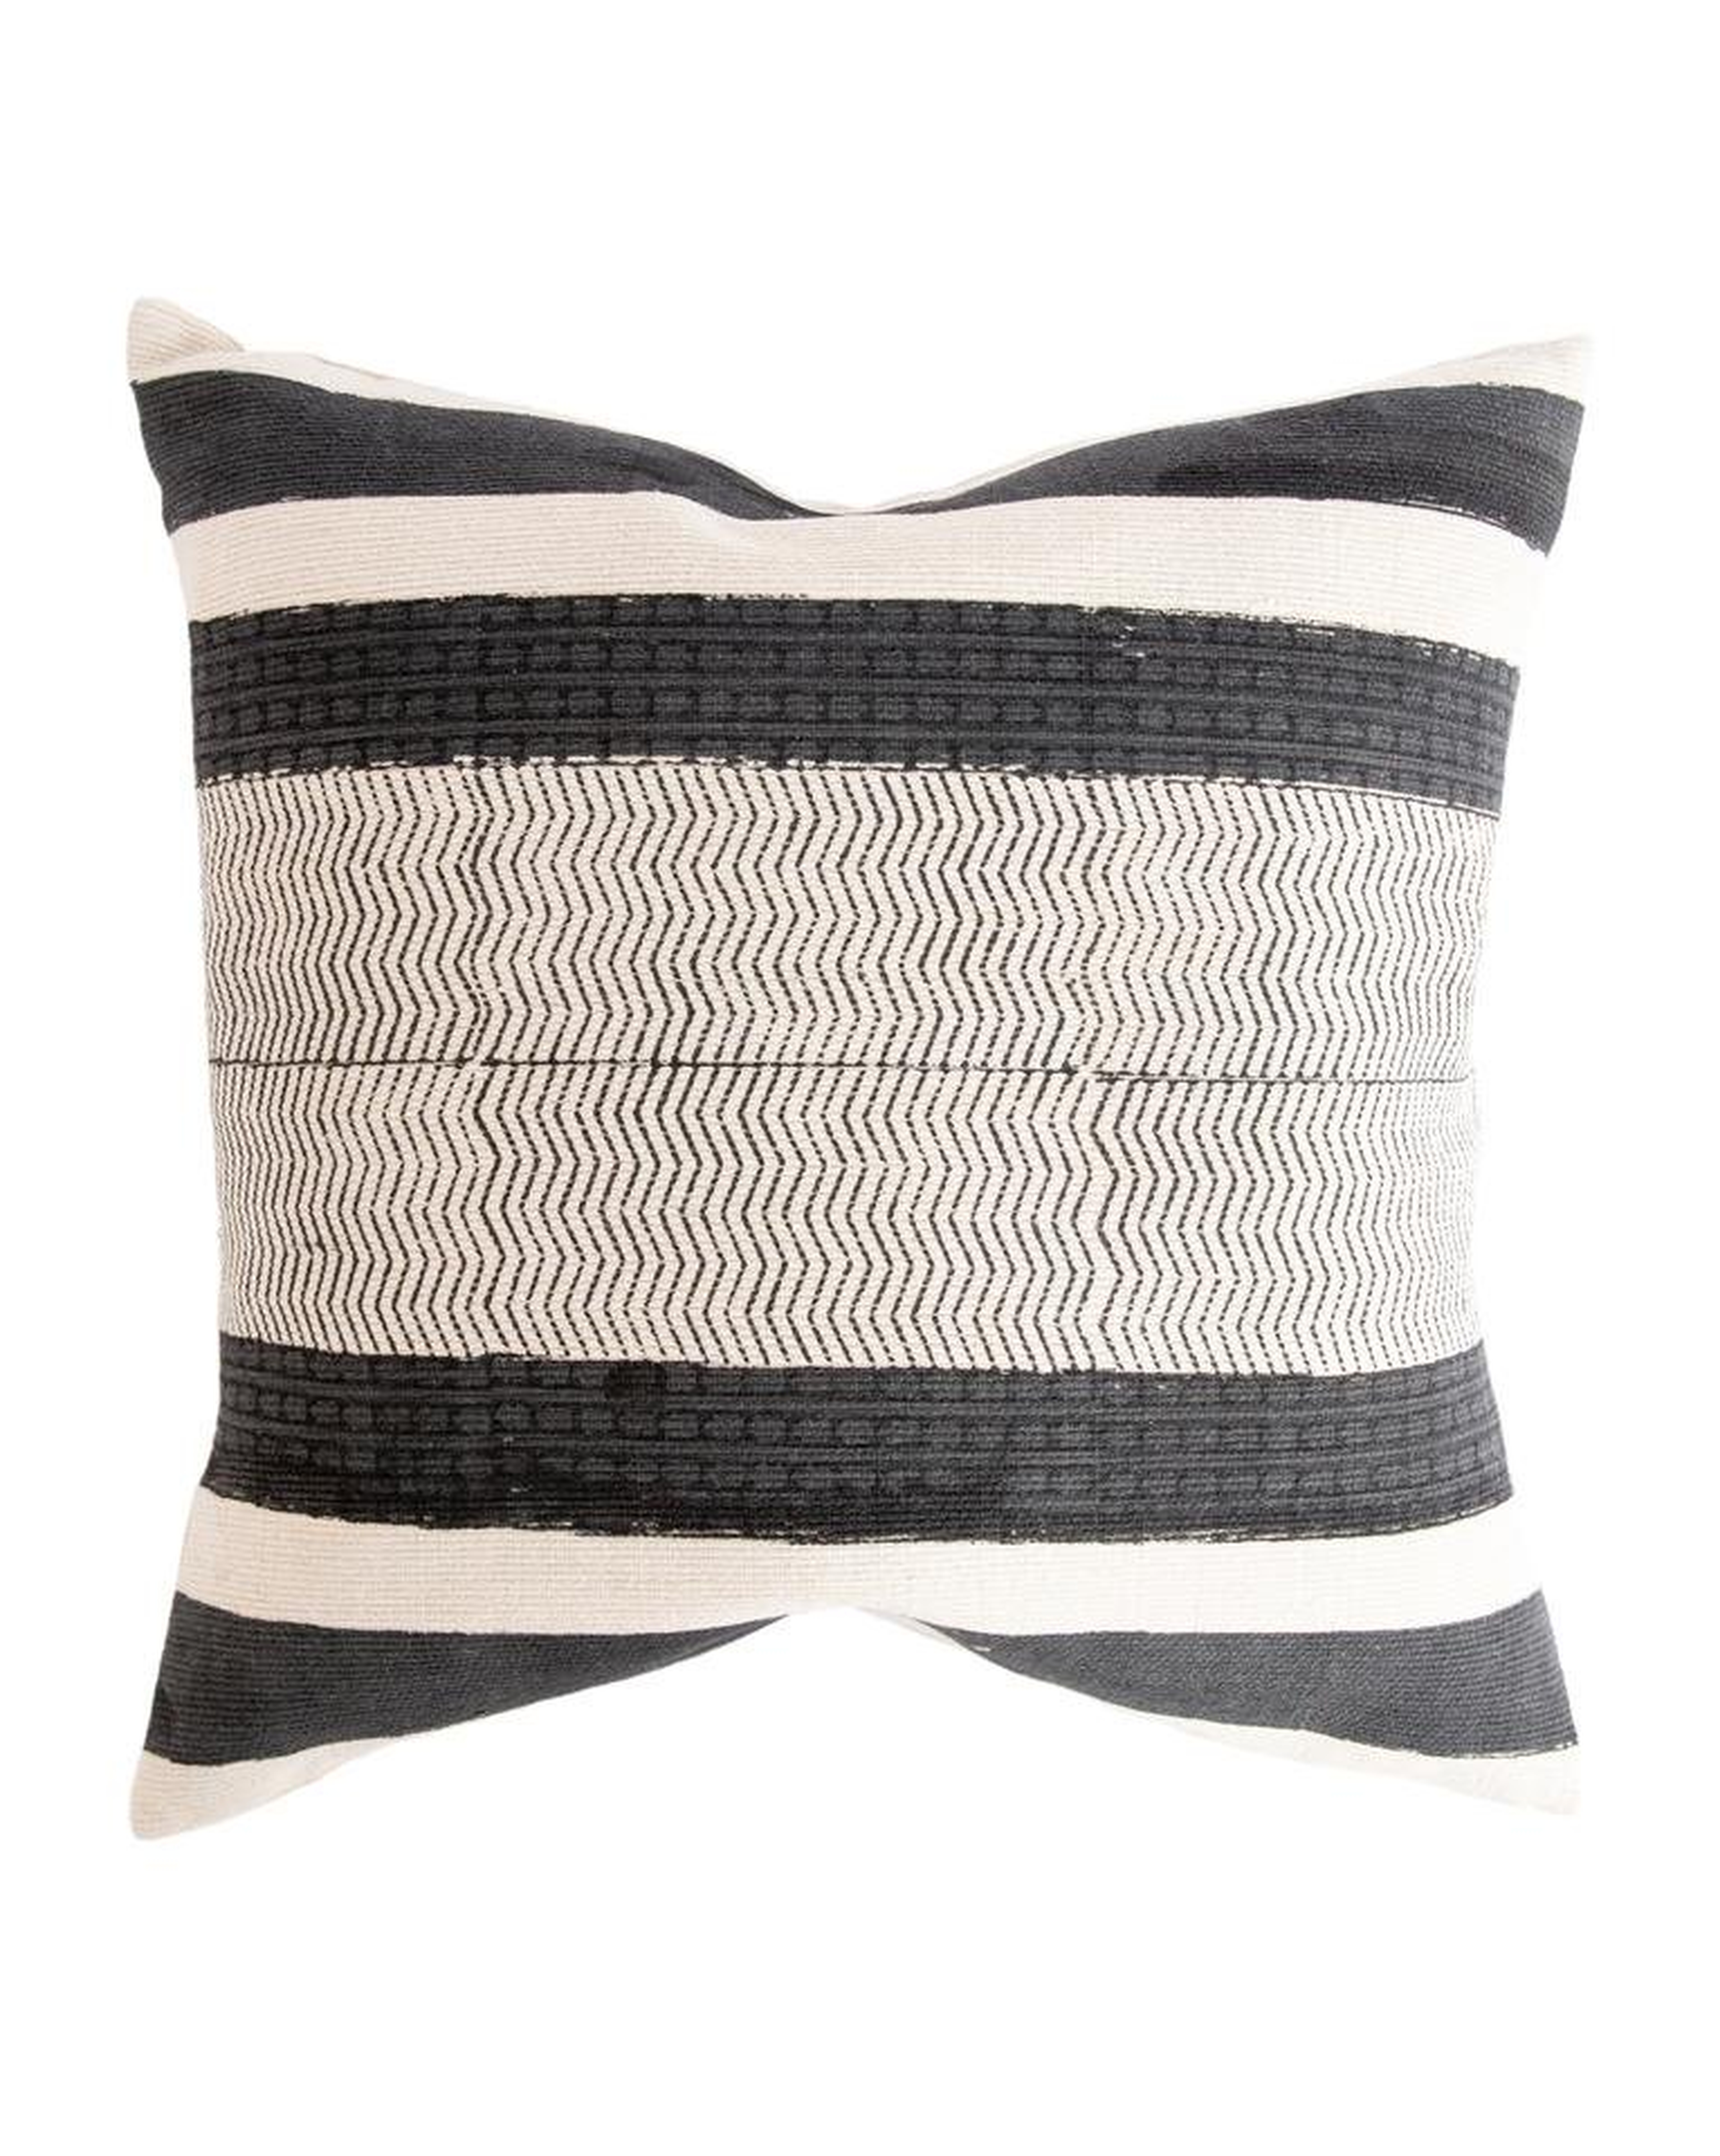 FREYA PILLOW WITH DOWN INSERT - McGee & Co.